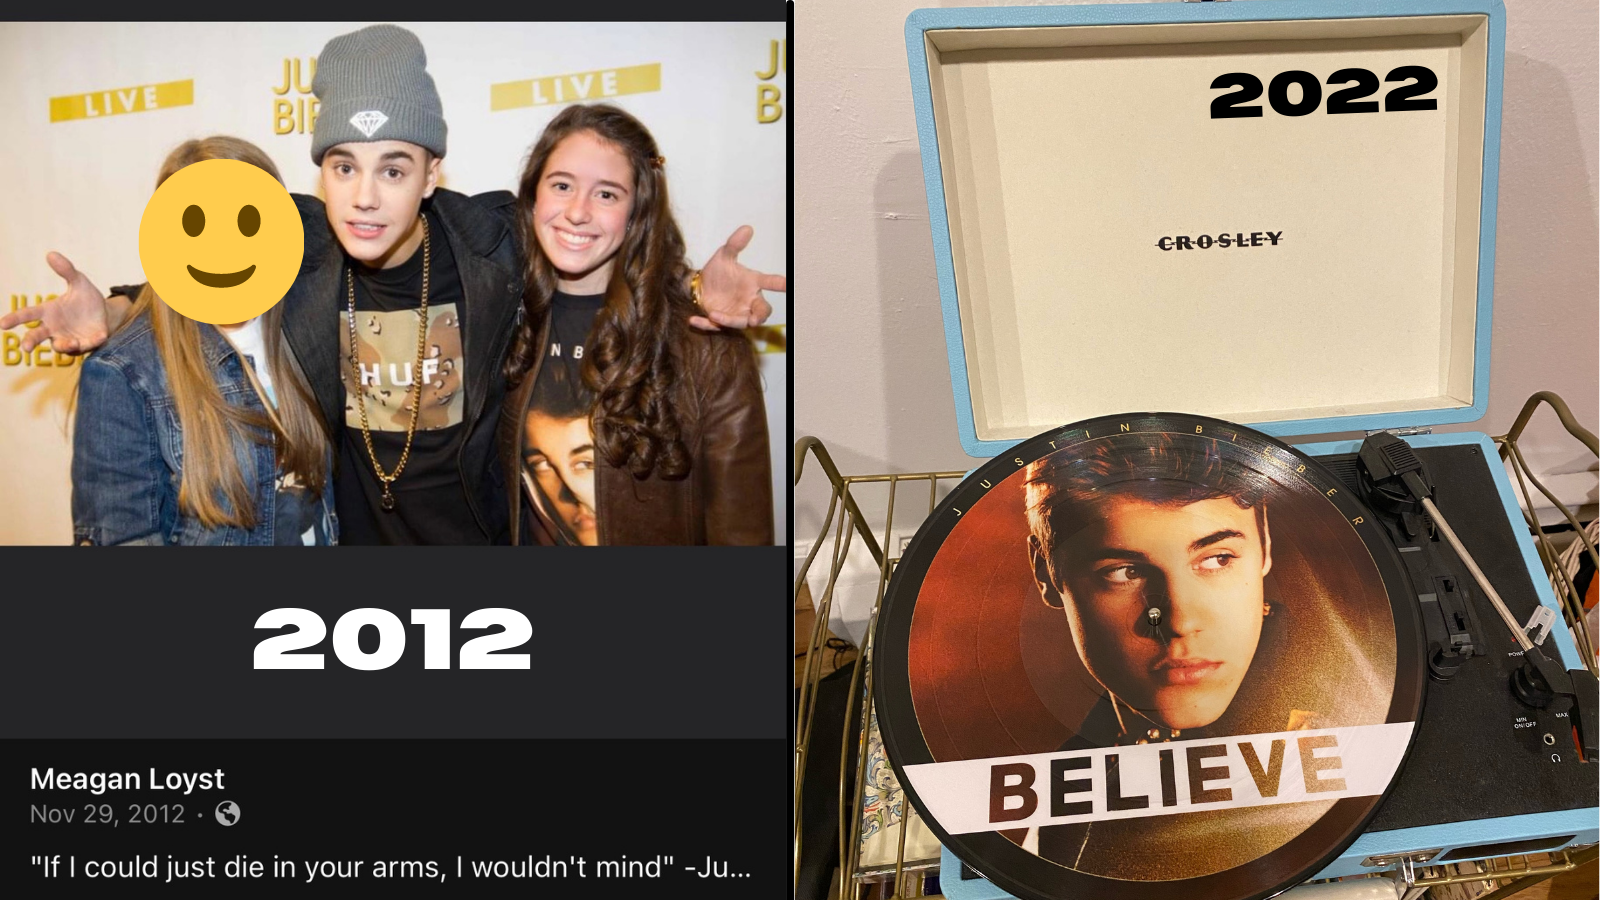 my fan journey with ~the biebs~ over the past 10 years